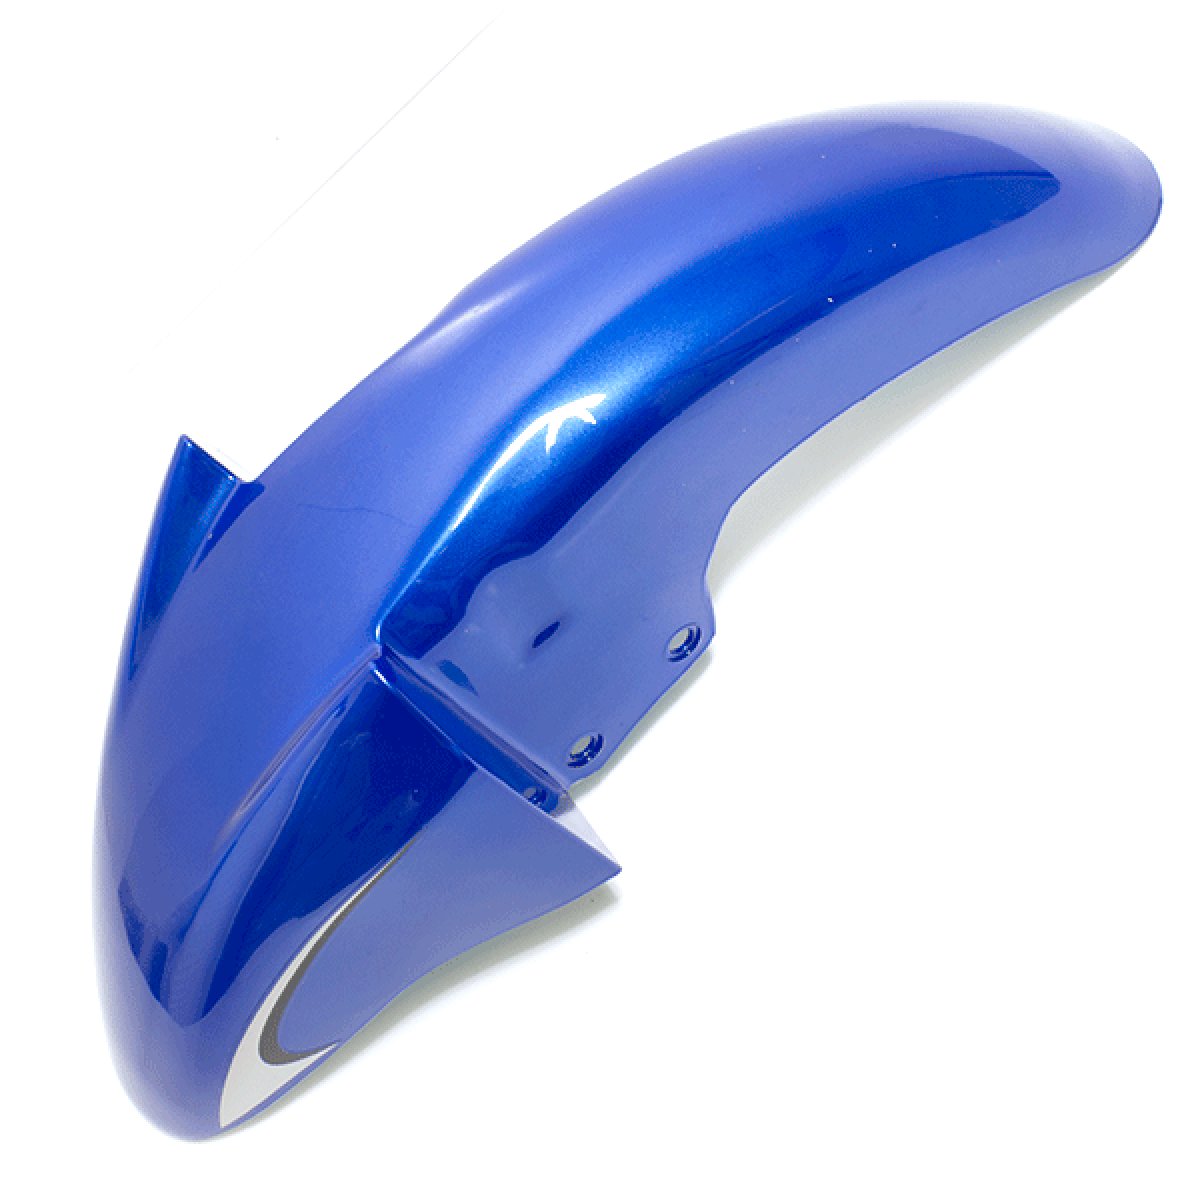 Metallic Blue Mudguard (Front) for HT125-4F (MGF168) (#168) | eBay